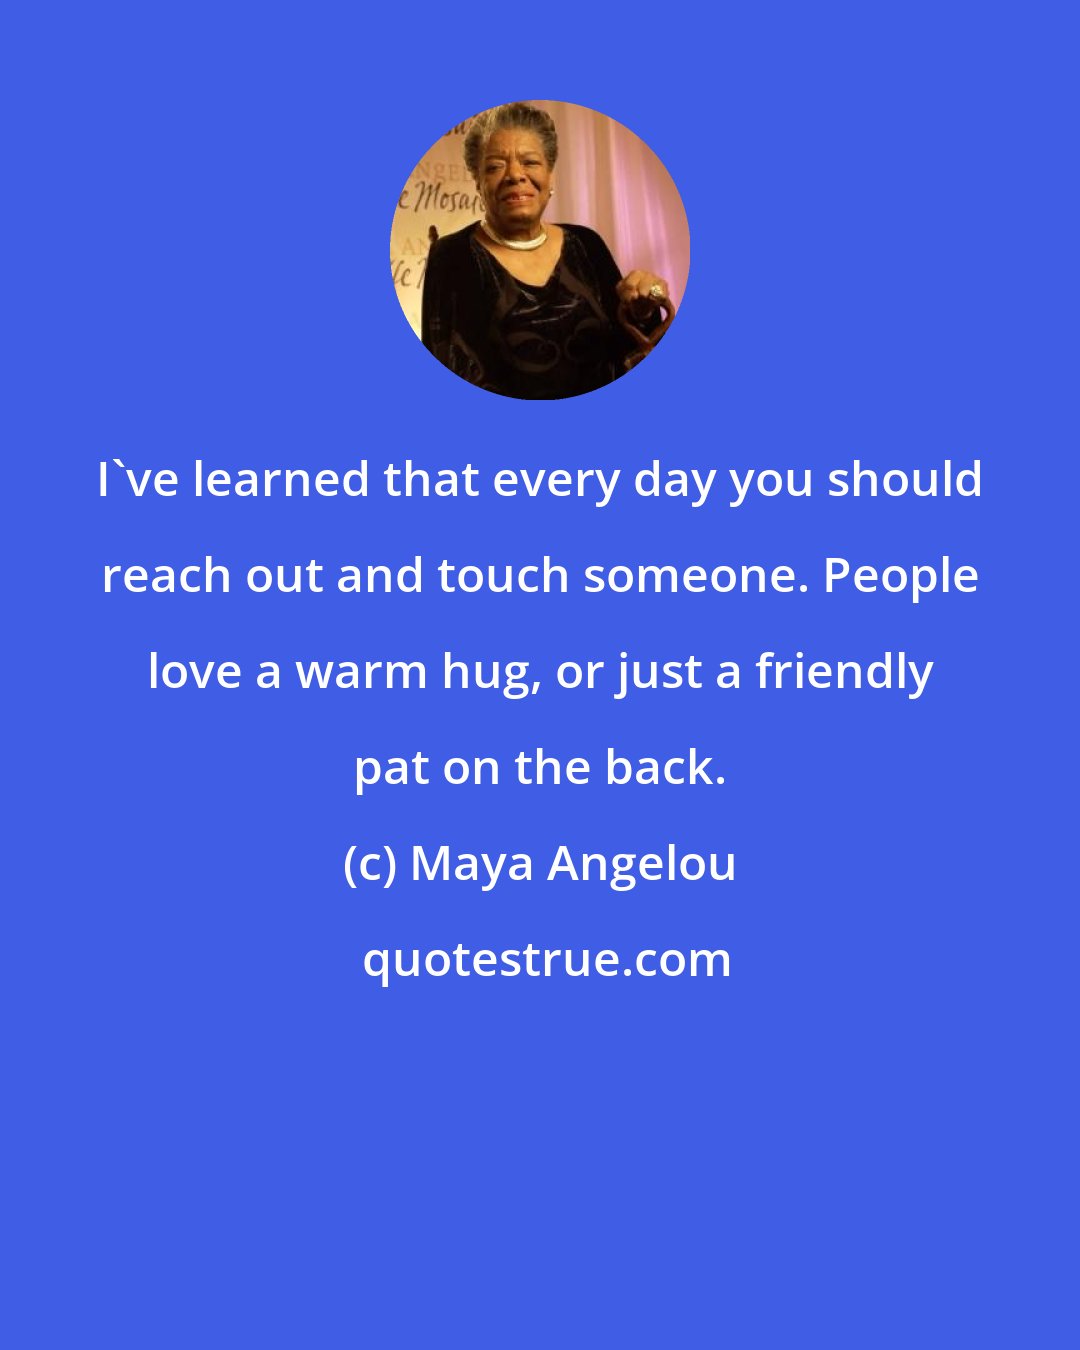 Maya Angelou: I've learned that every day you should reach out and touch someone. People love a warm hug, or just a friendly pat on the back.